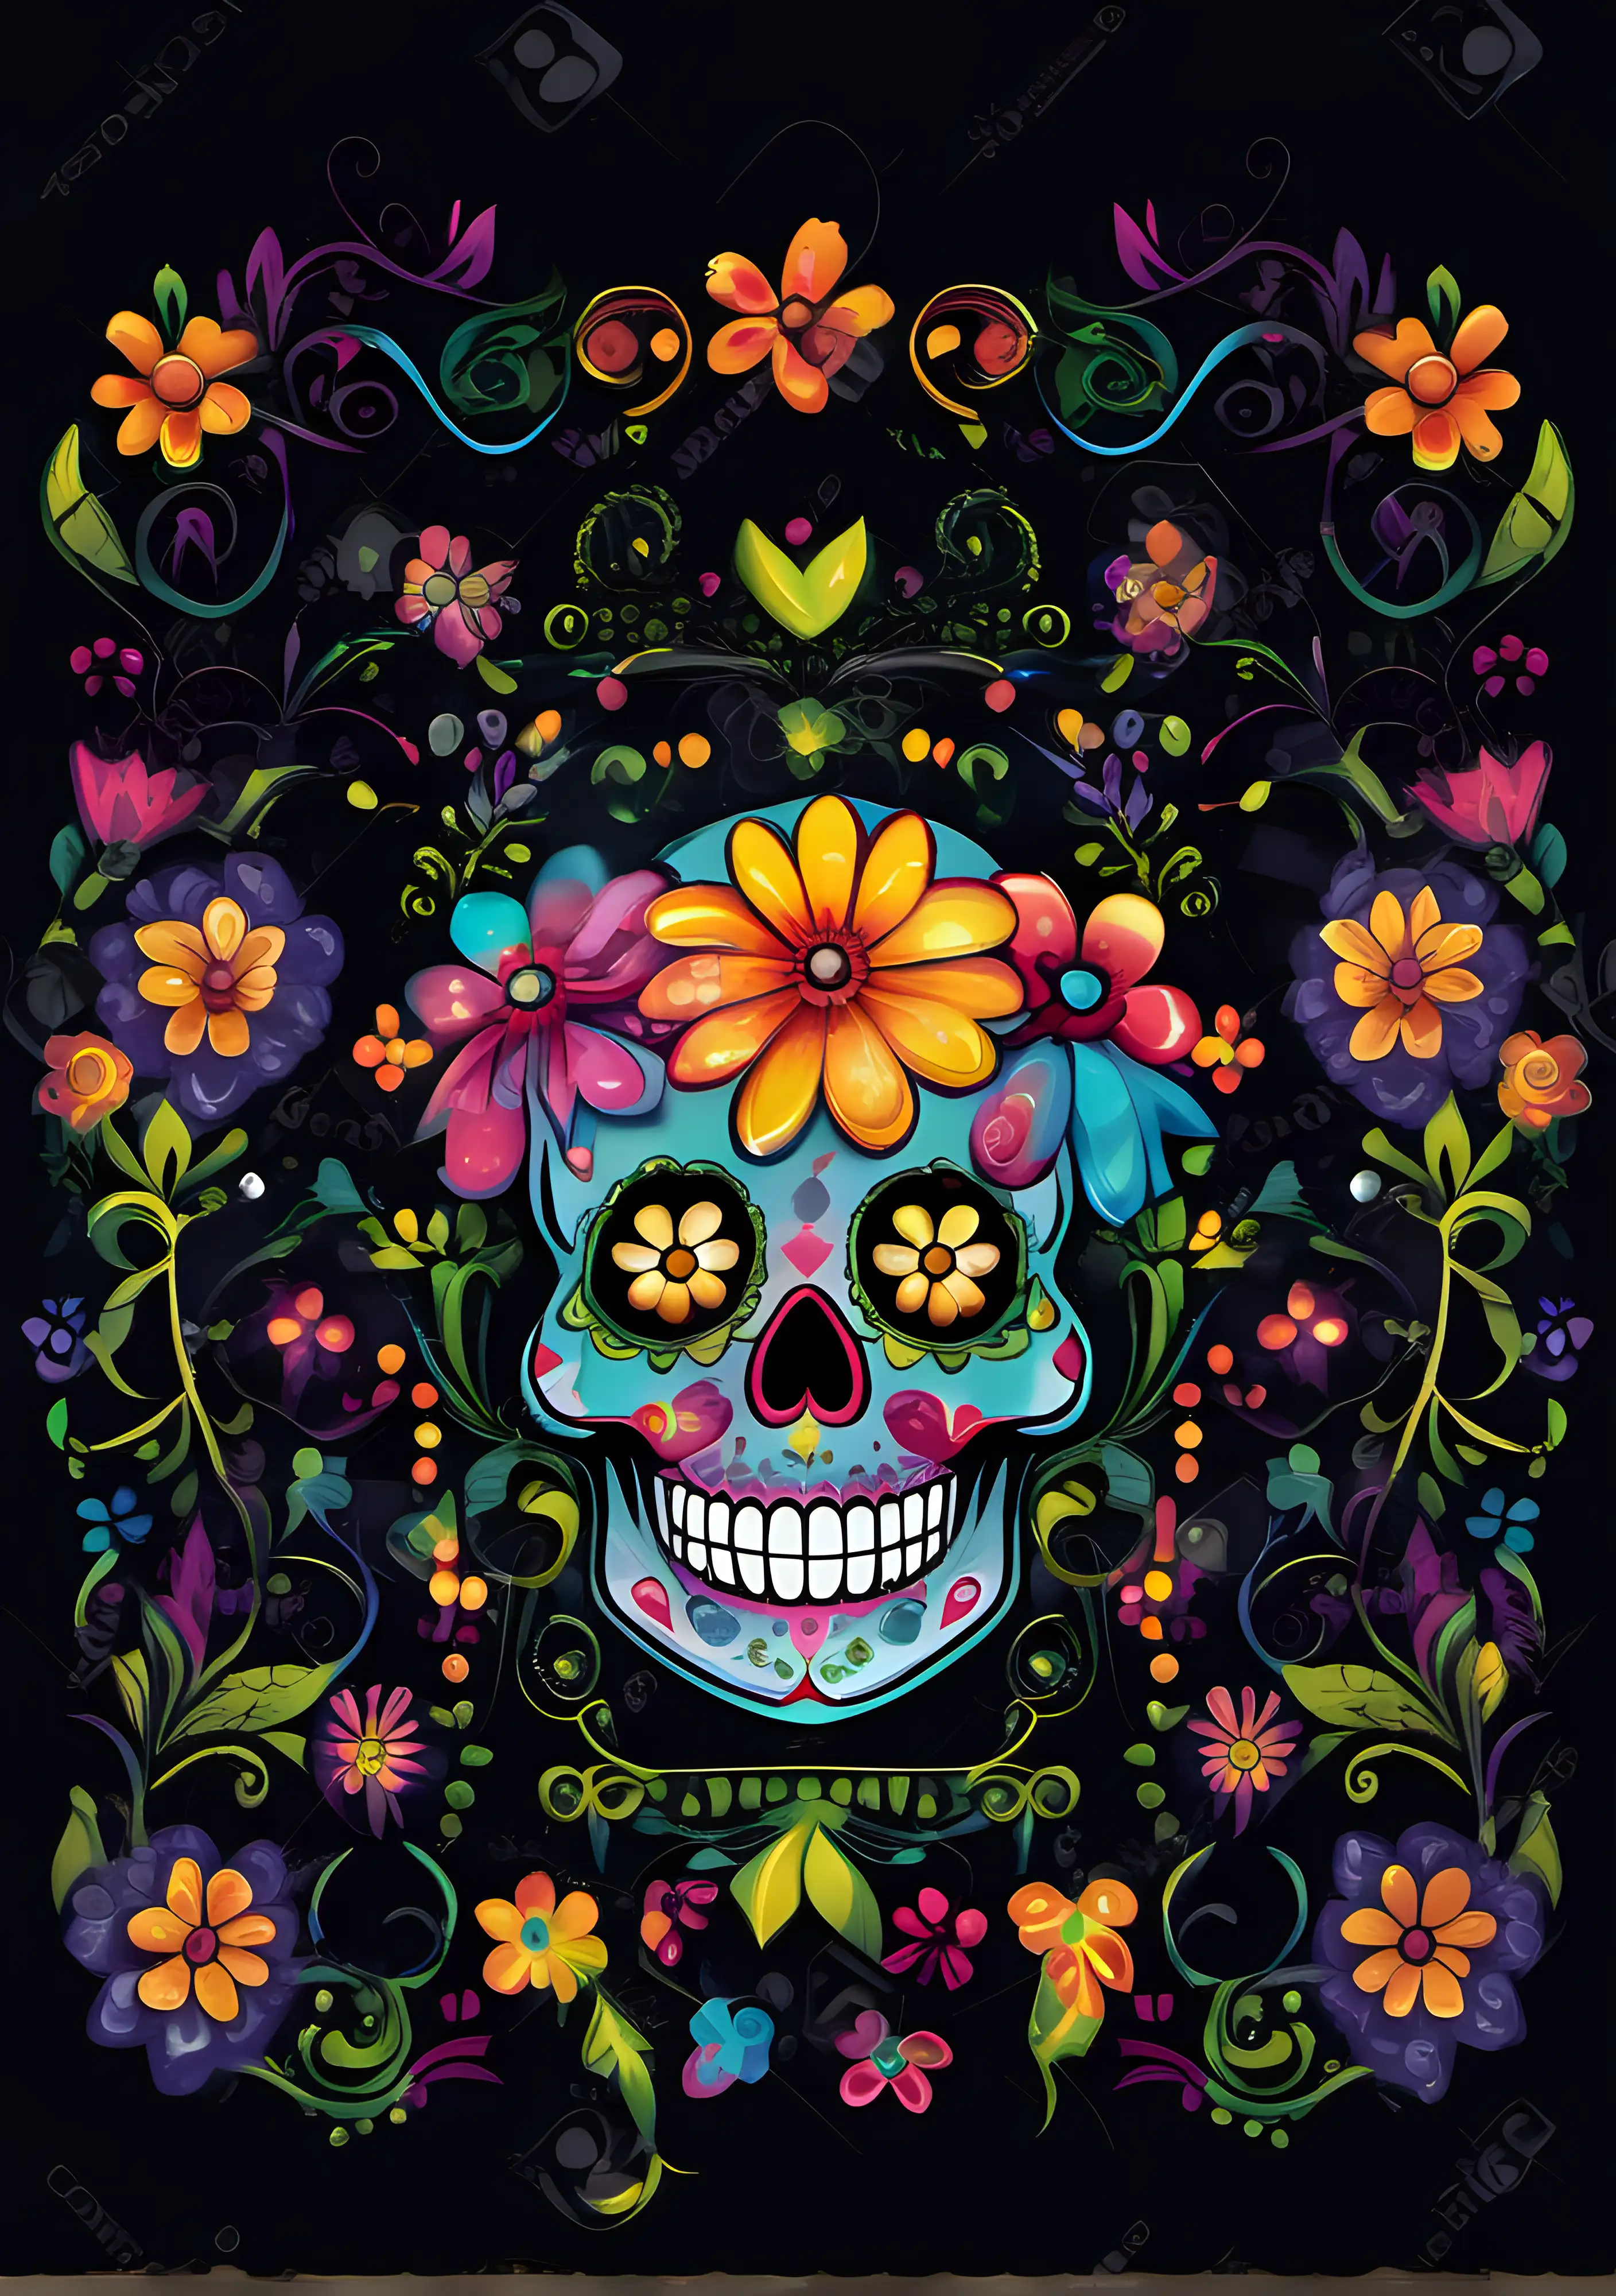 Vibrant and Cheerful Sugar Skull Art with Floral Border